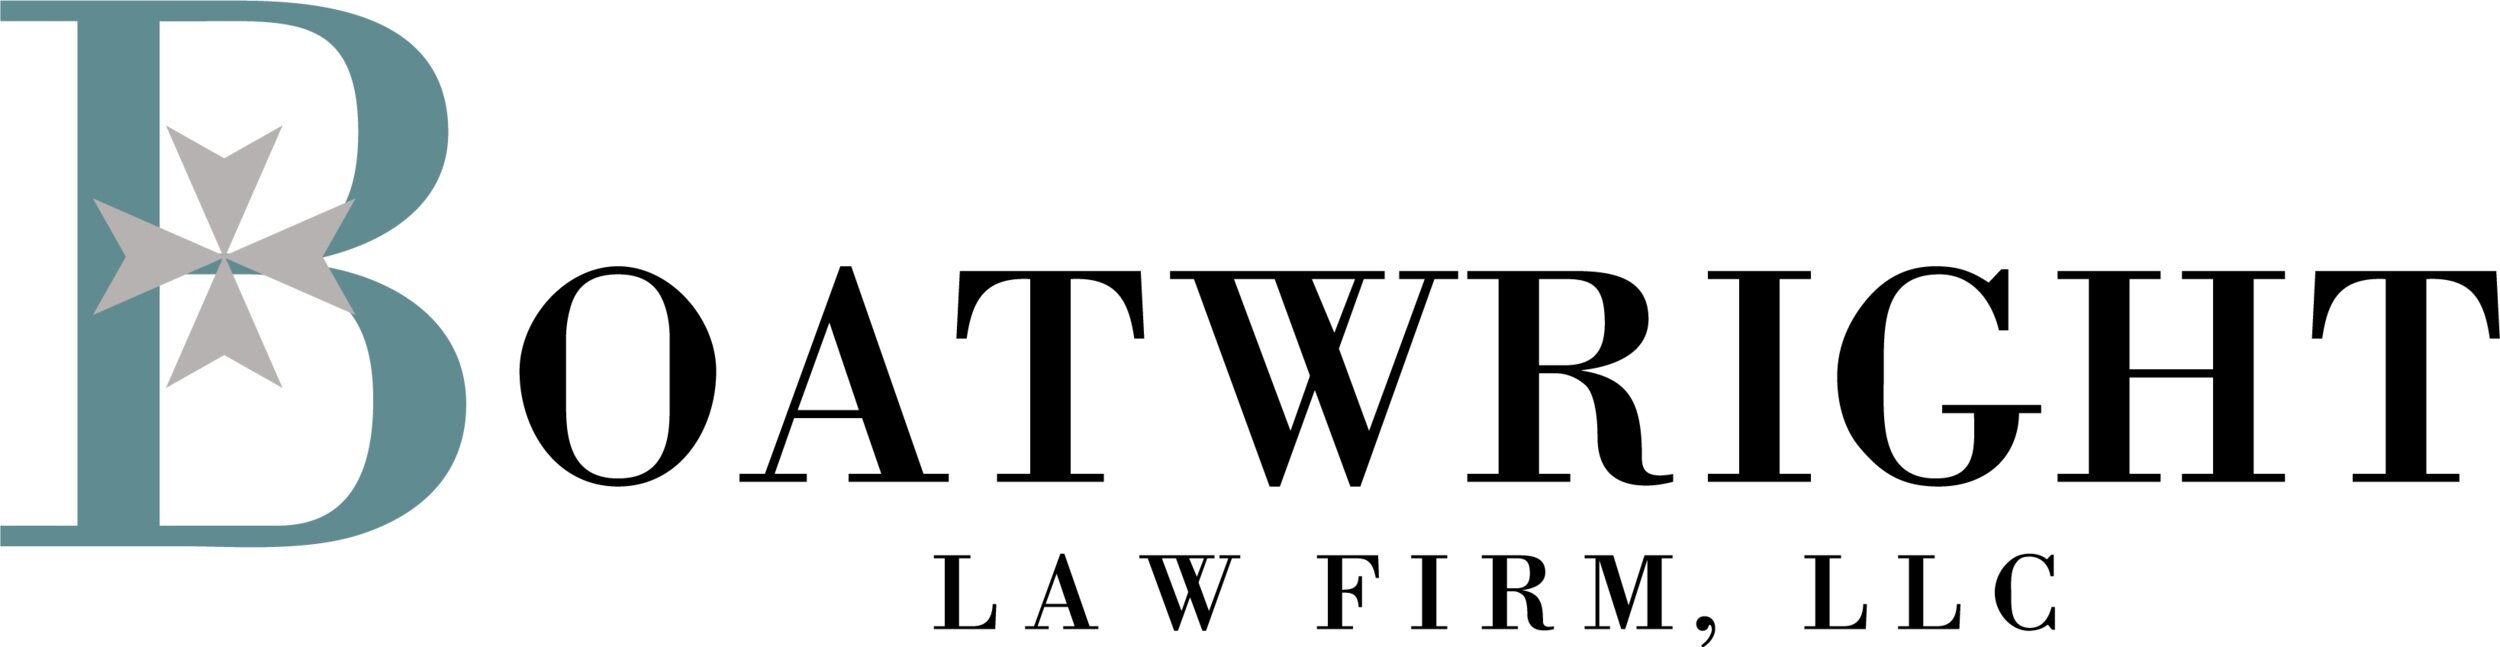 Boatwright Law Firm